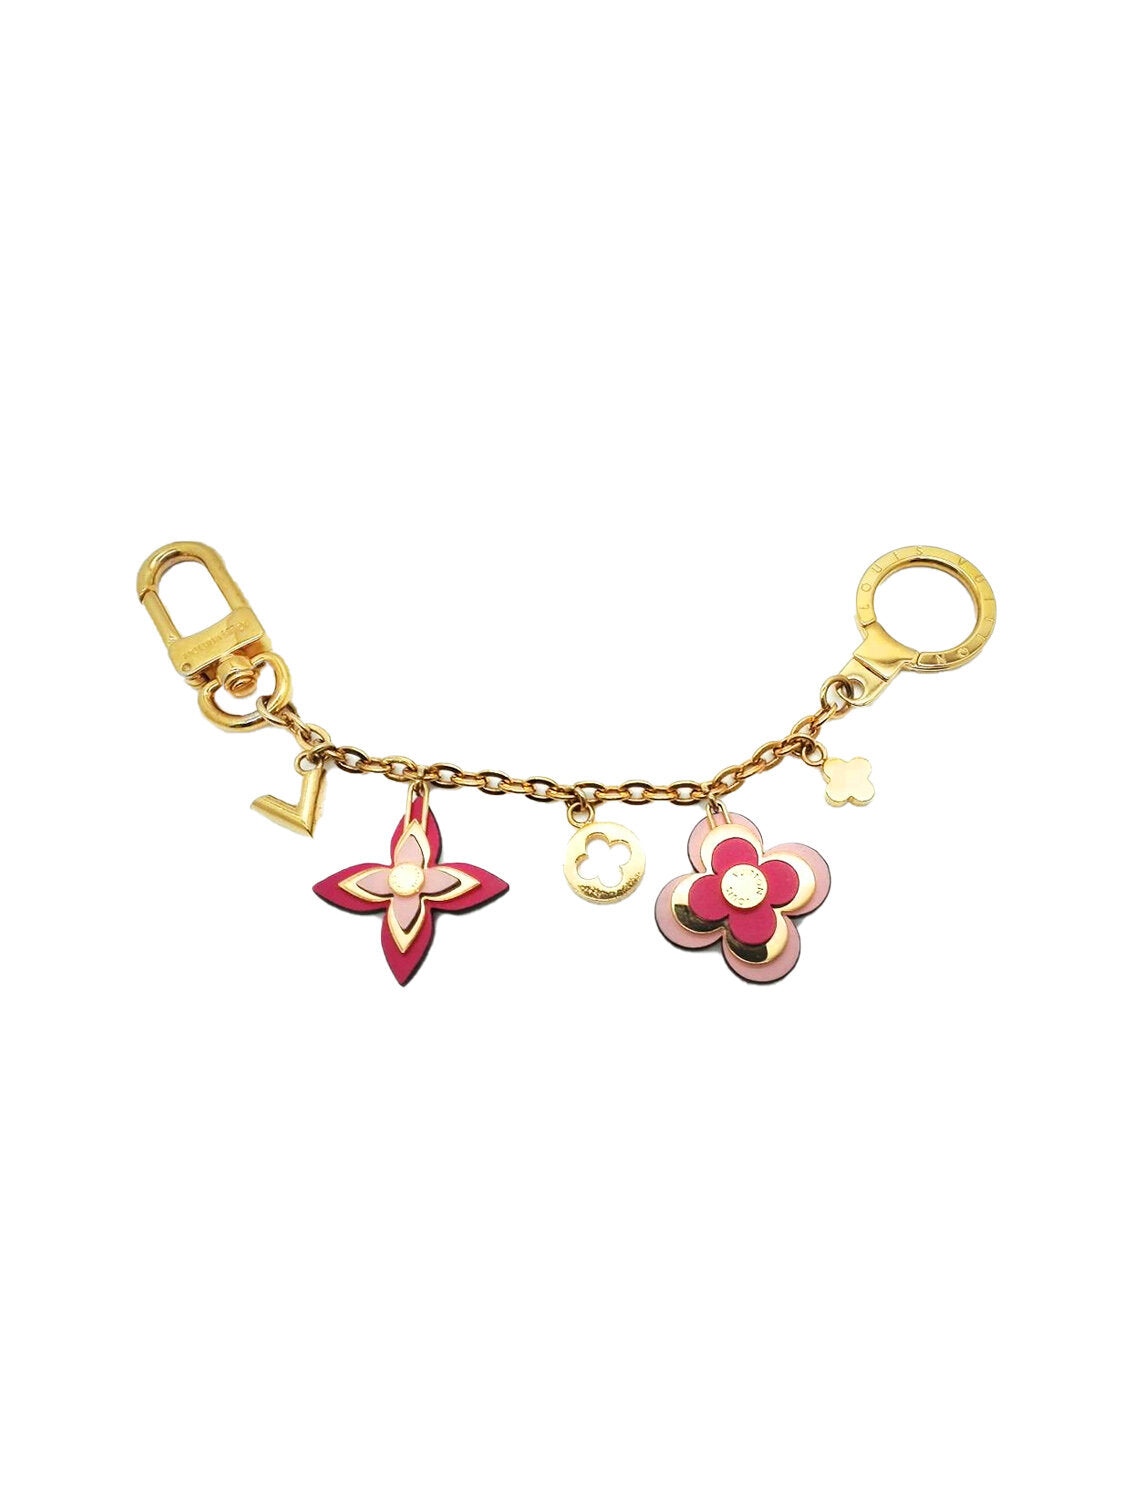 LV Blooming Flowers Chain Bag Charm and Key Holder, Pink, One Size